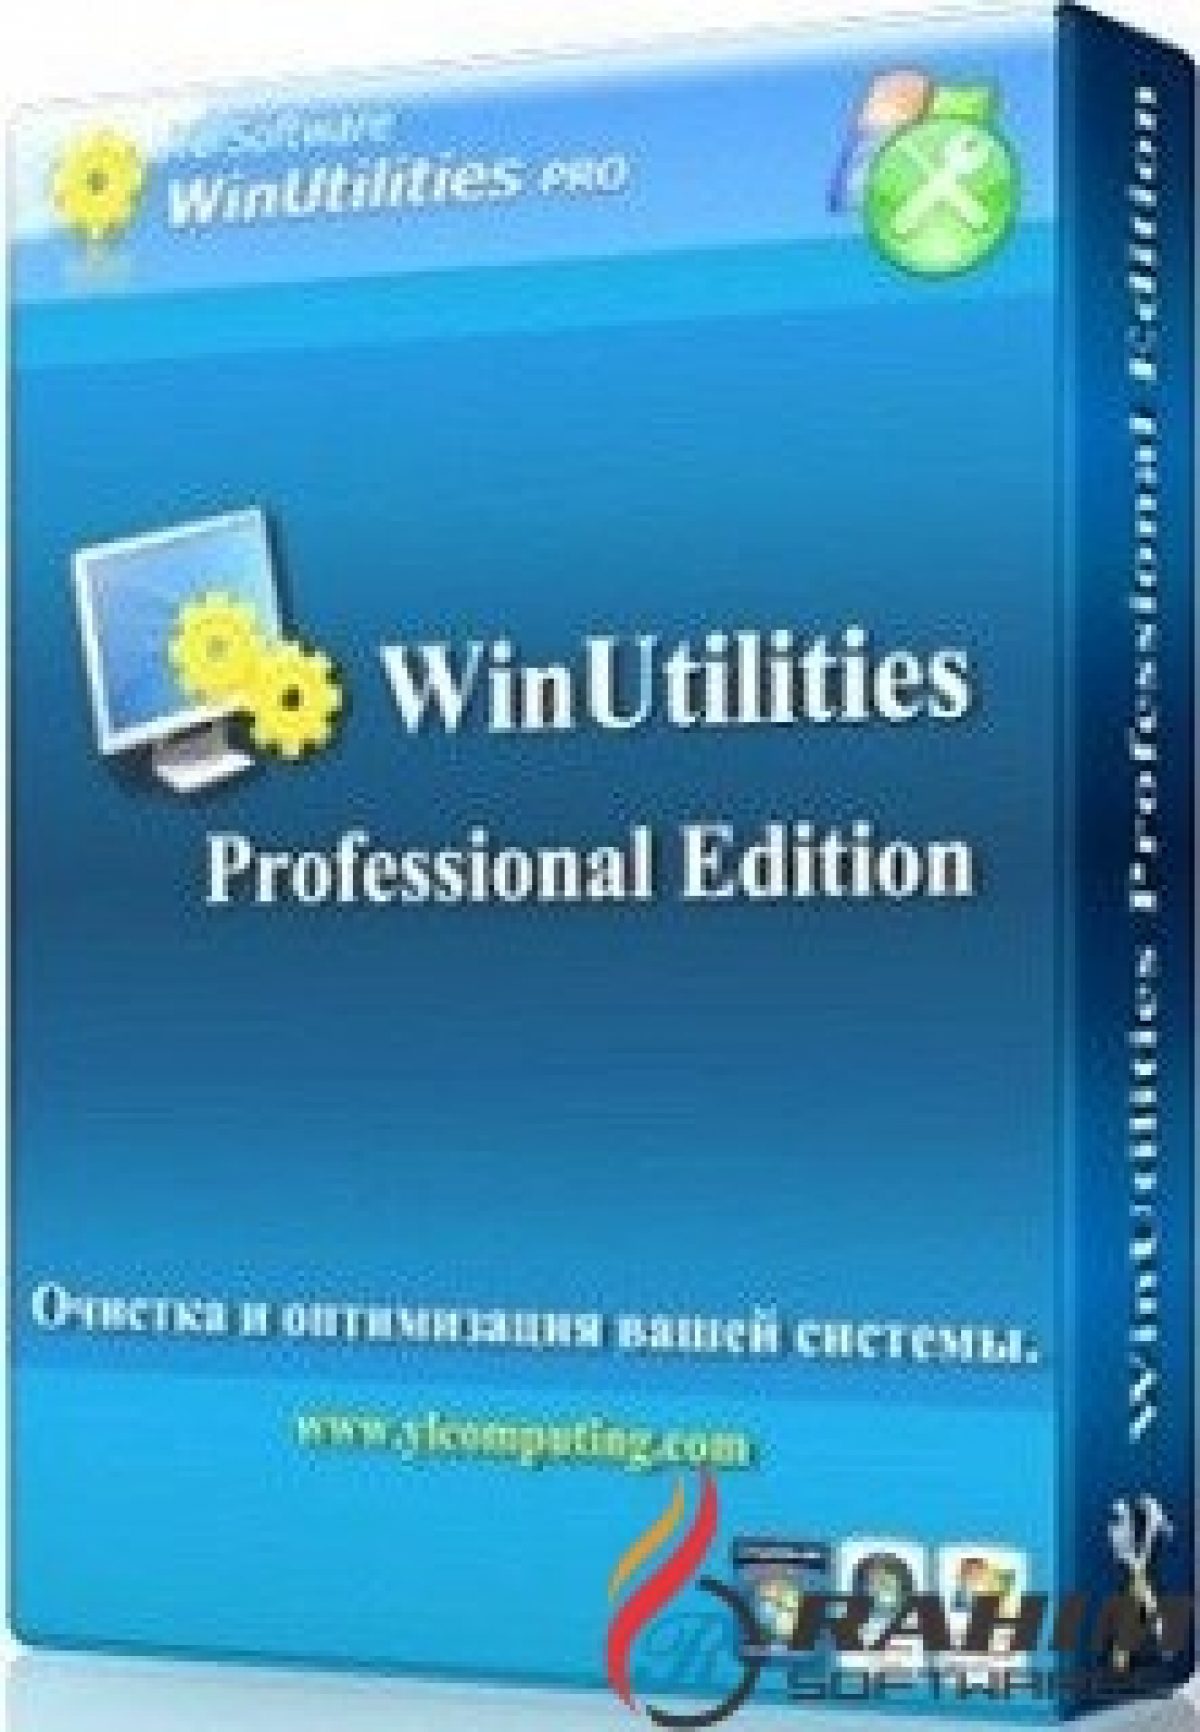 win cleaner free download